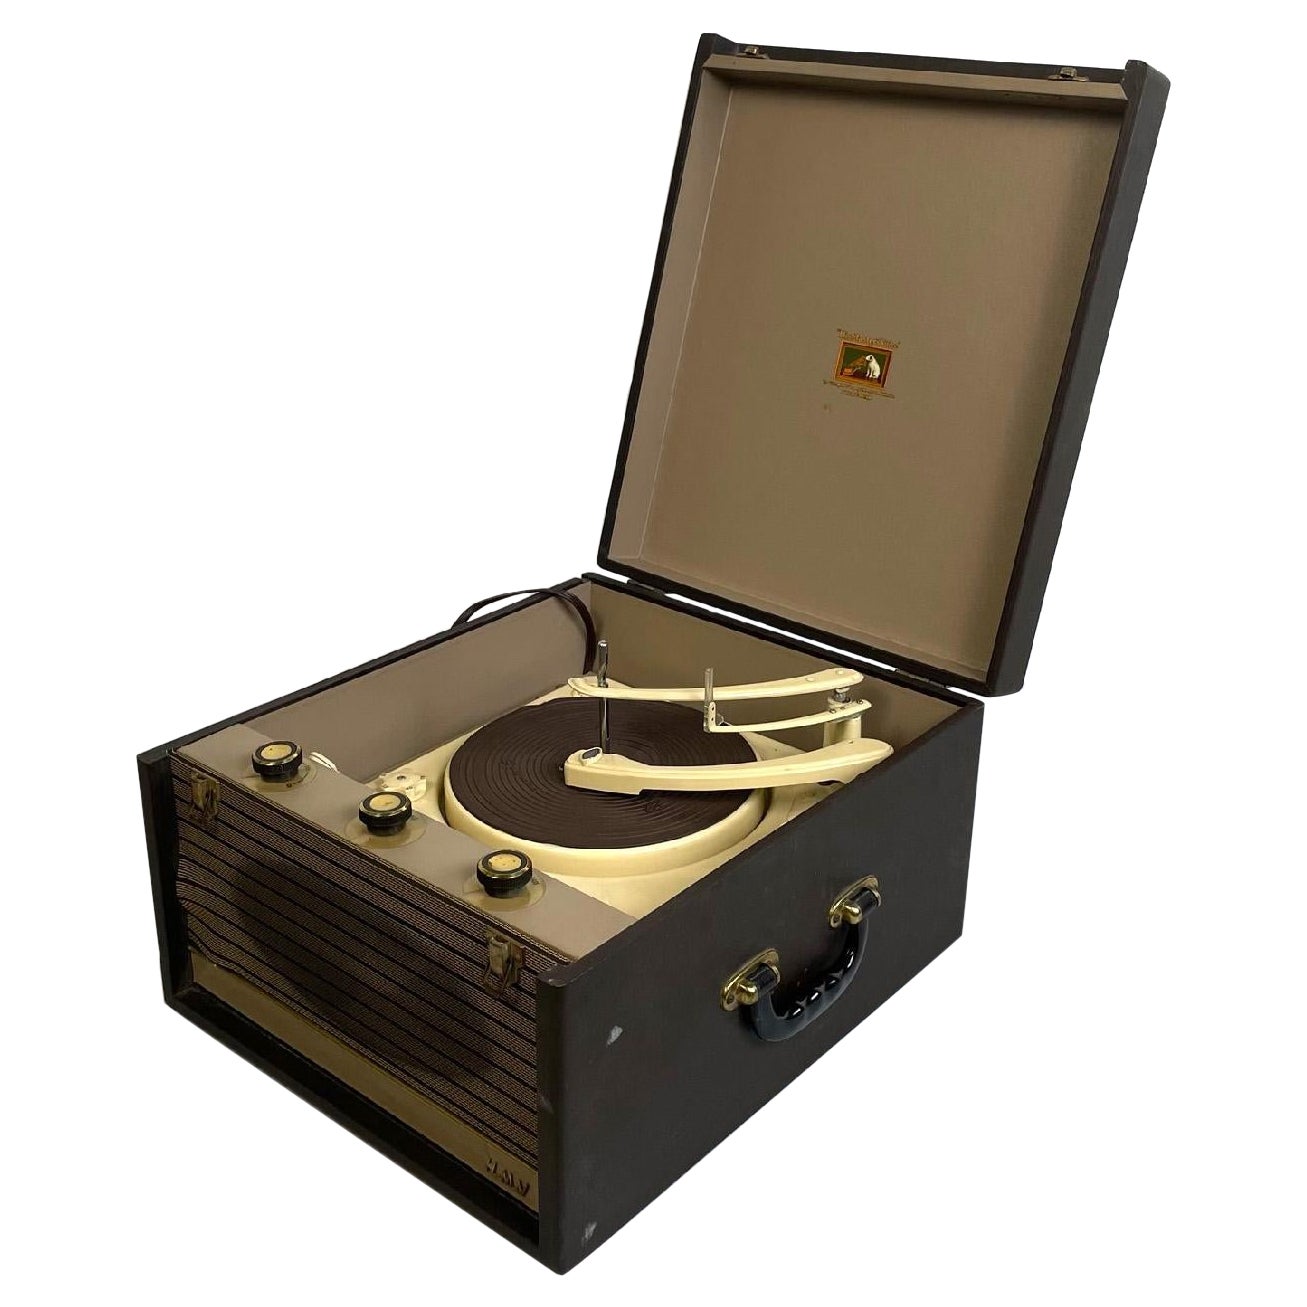 Did they have record players in the 1930s?